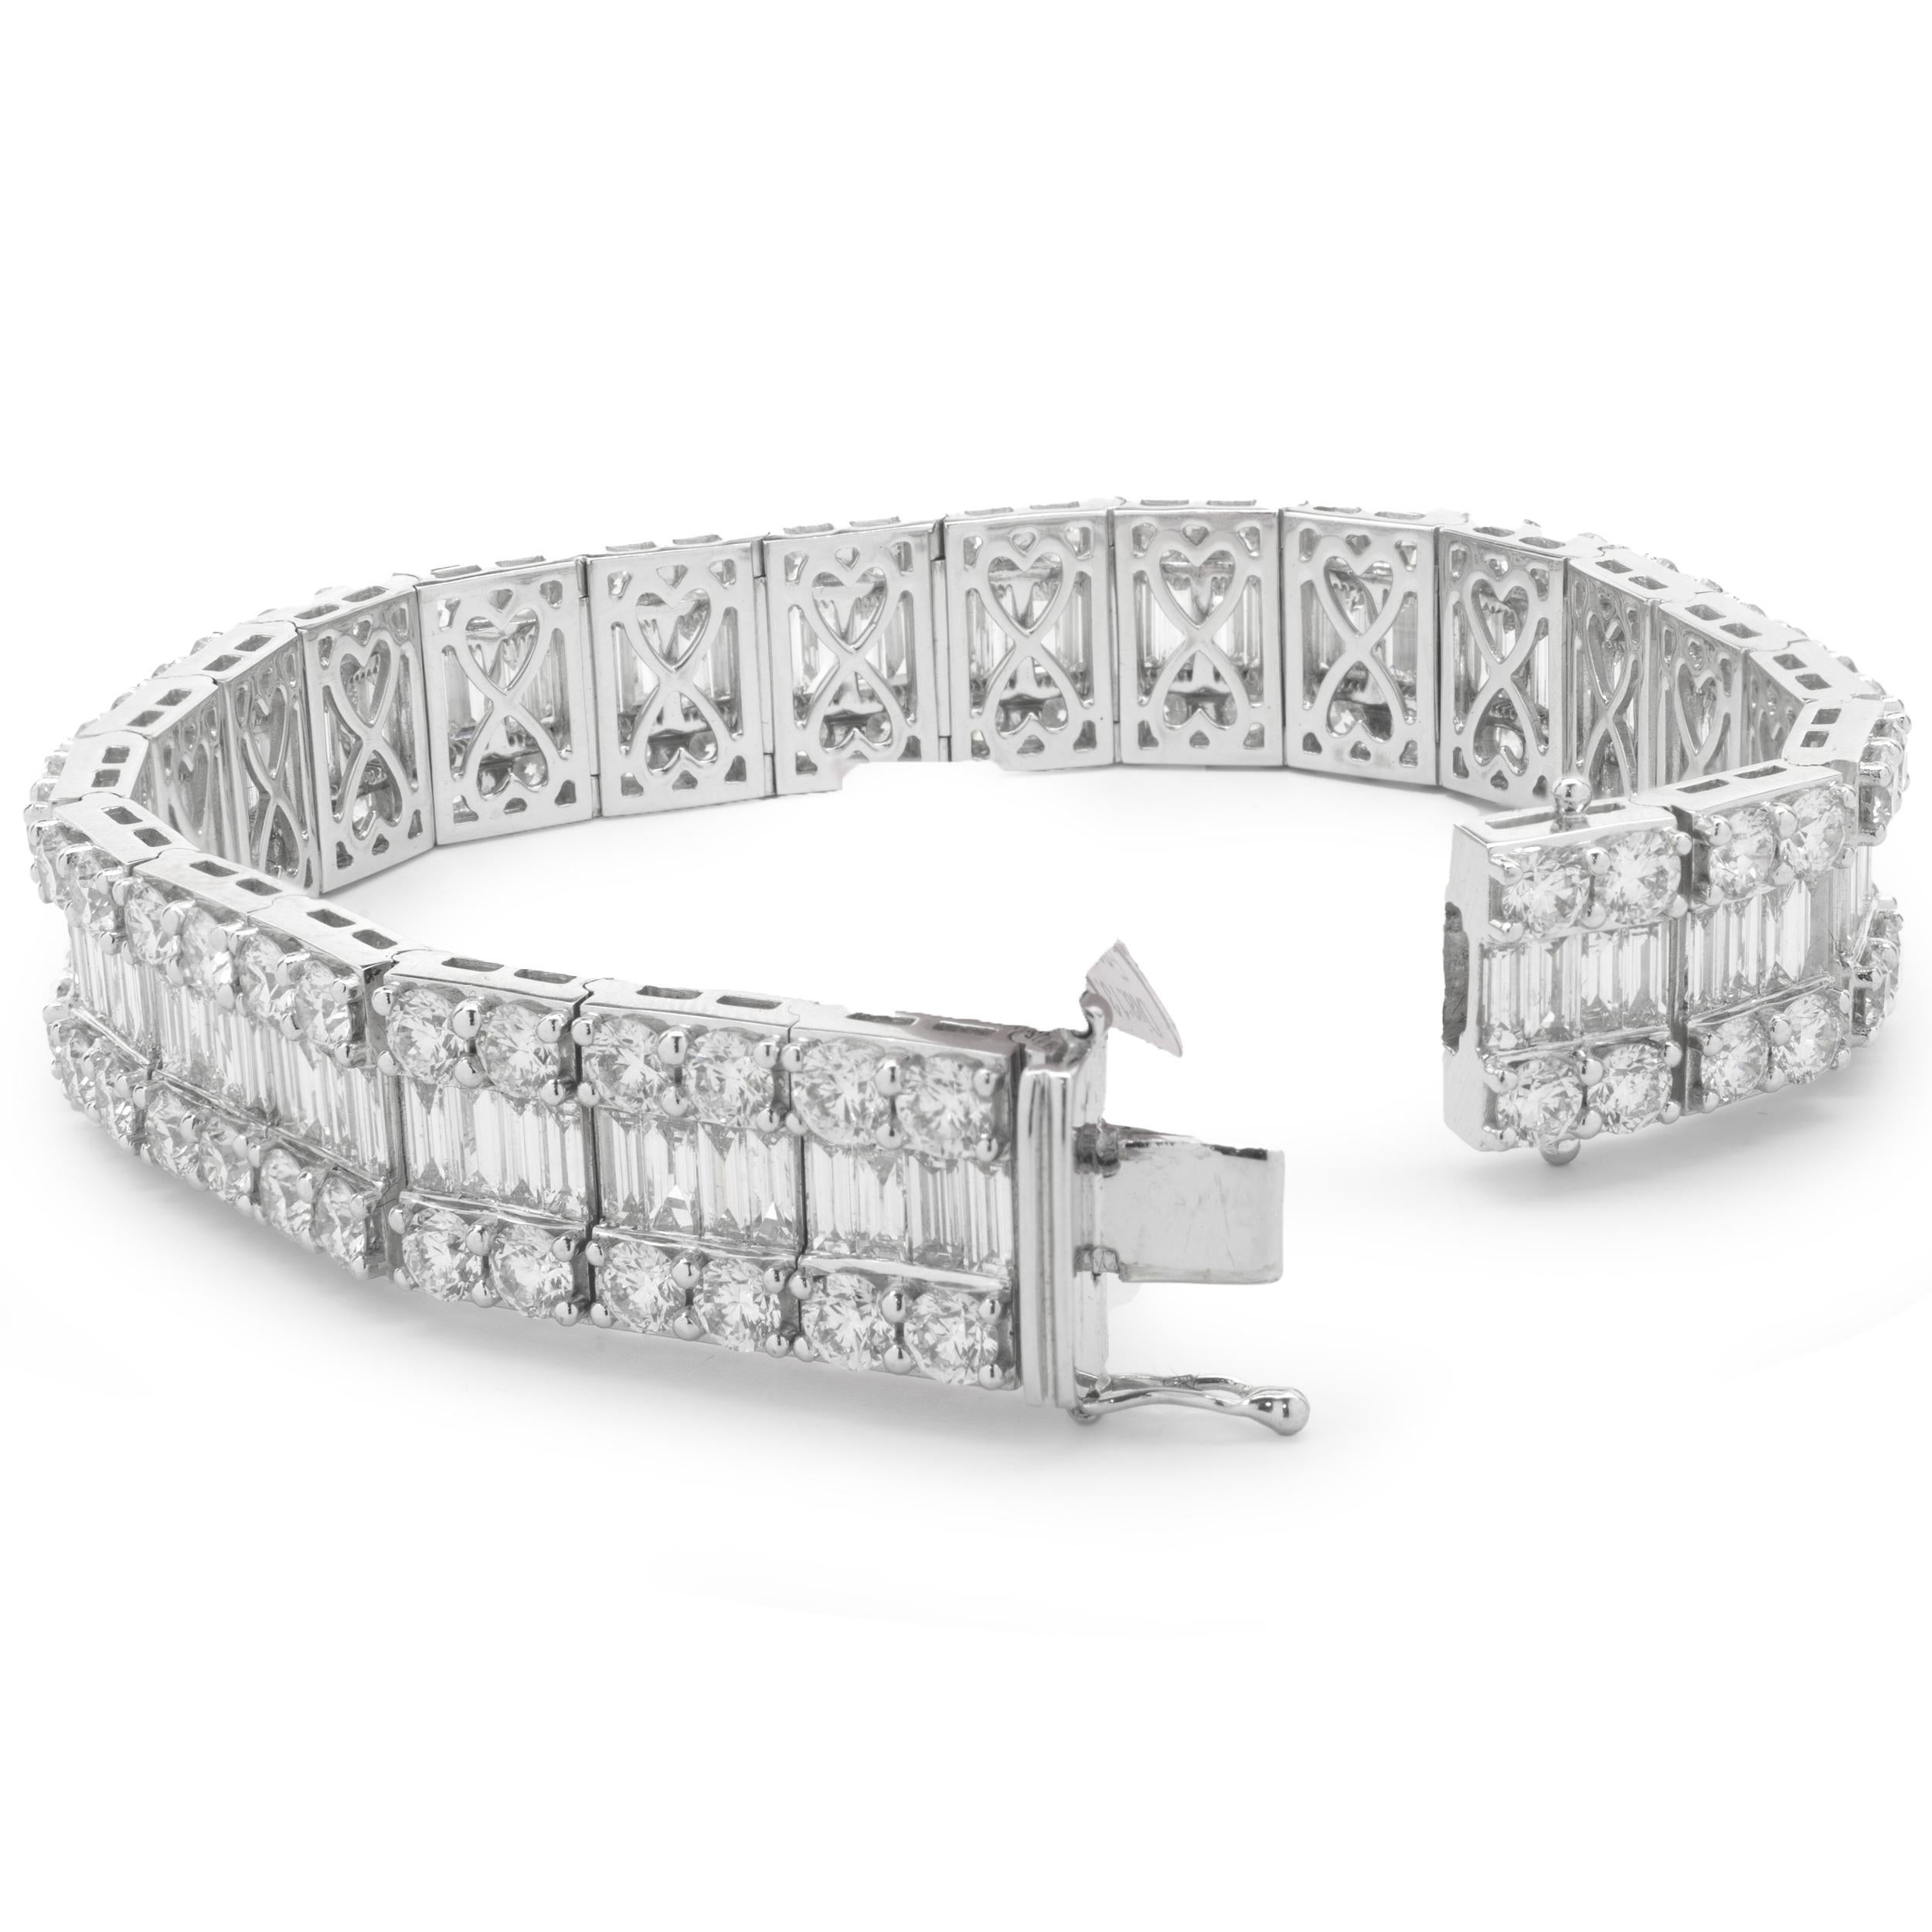 Designer: custom
Material: 18K white gold
Diamond: 184 round brilliant and baguette= 21.95cttw
Color: G
Clarity: VS
Dimensions: bracelet will fit up to a 7-inch wrist
Weight: 53.12 grams
